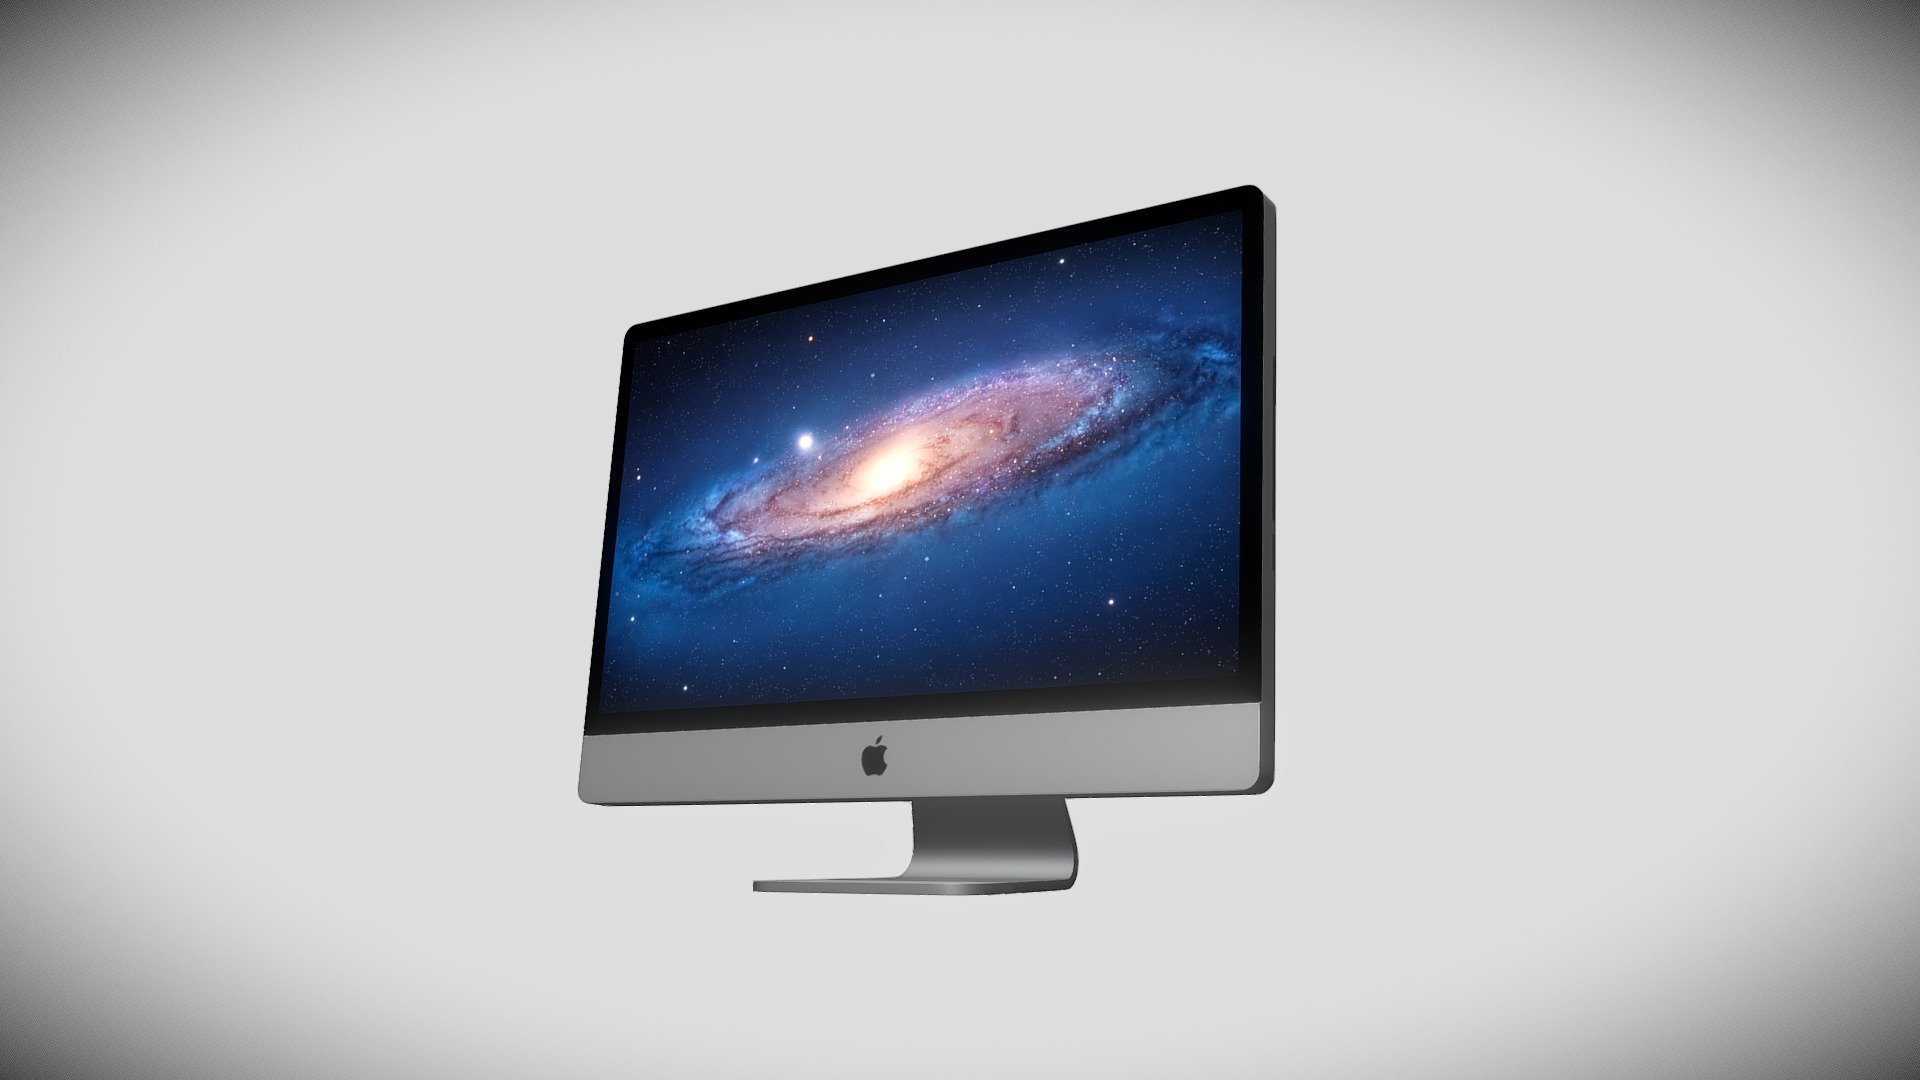 The larger of the two models of iMac that apple produced between 2009 and 2011. I was disappointed with the quality of other models of iMacs available on Sketchfab, so I decided to make my own 3d model